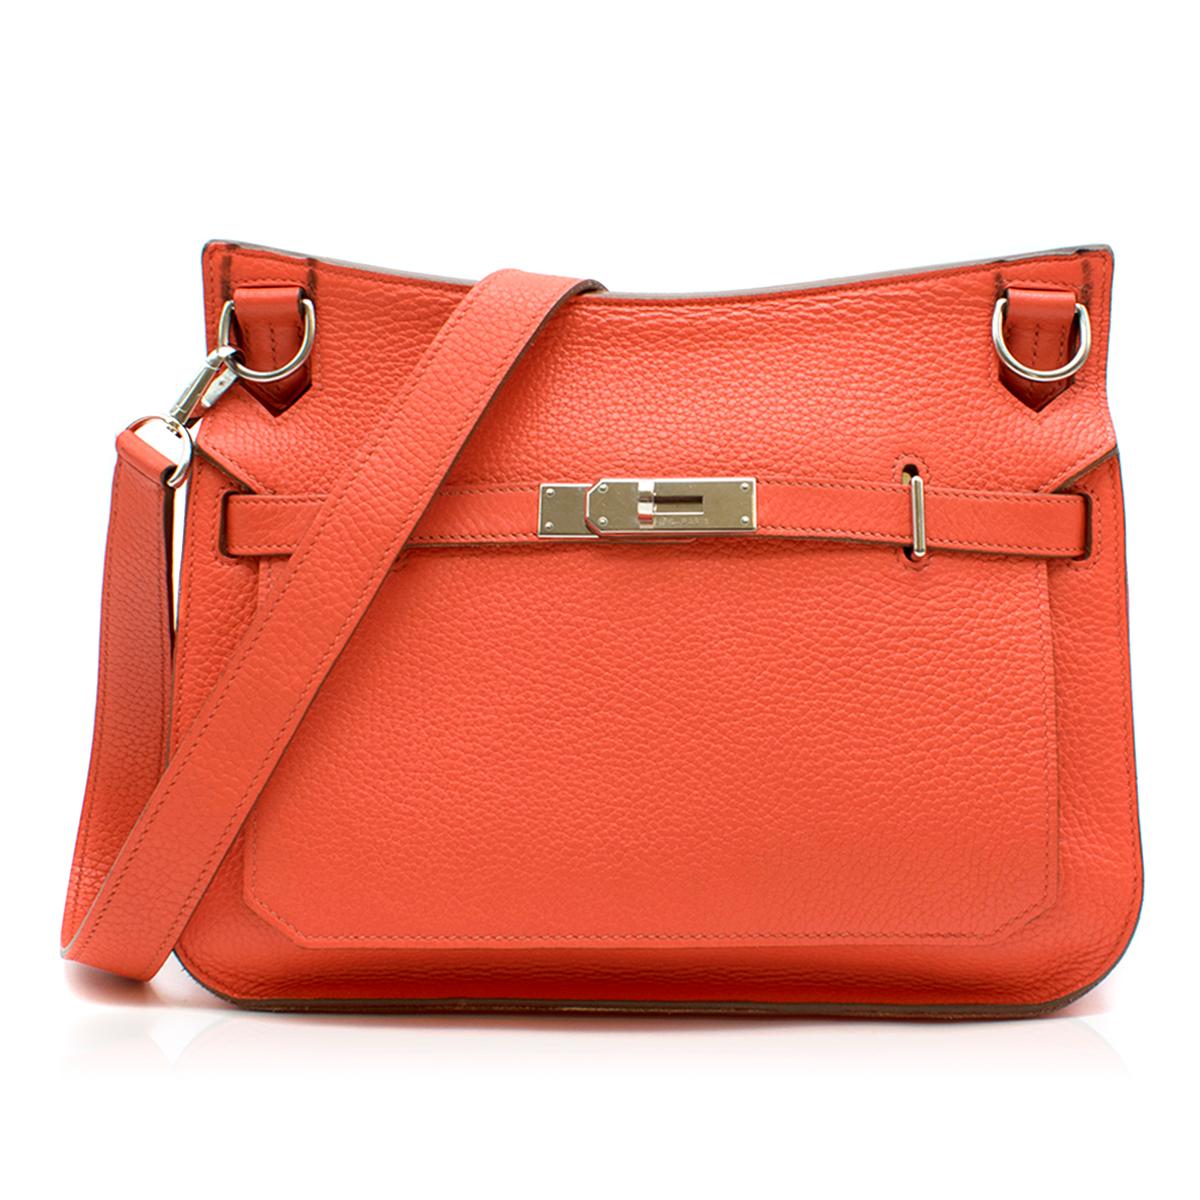 Hermes Capucine Clemence Leather Jypsiere 28 Bag 

- Serial Number: T
- Age (Circa): 2015
- Coral, Clemence leather 
- Detachable  leather shoulder straps
- Brown lacquered edges, signature palladium plated hardware 
- Signature twist-lock fastening